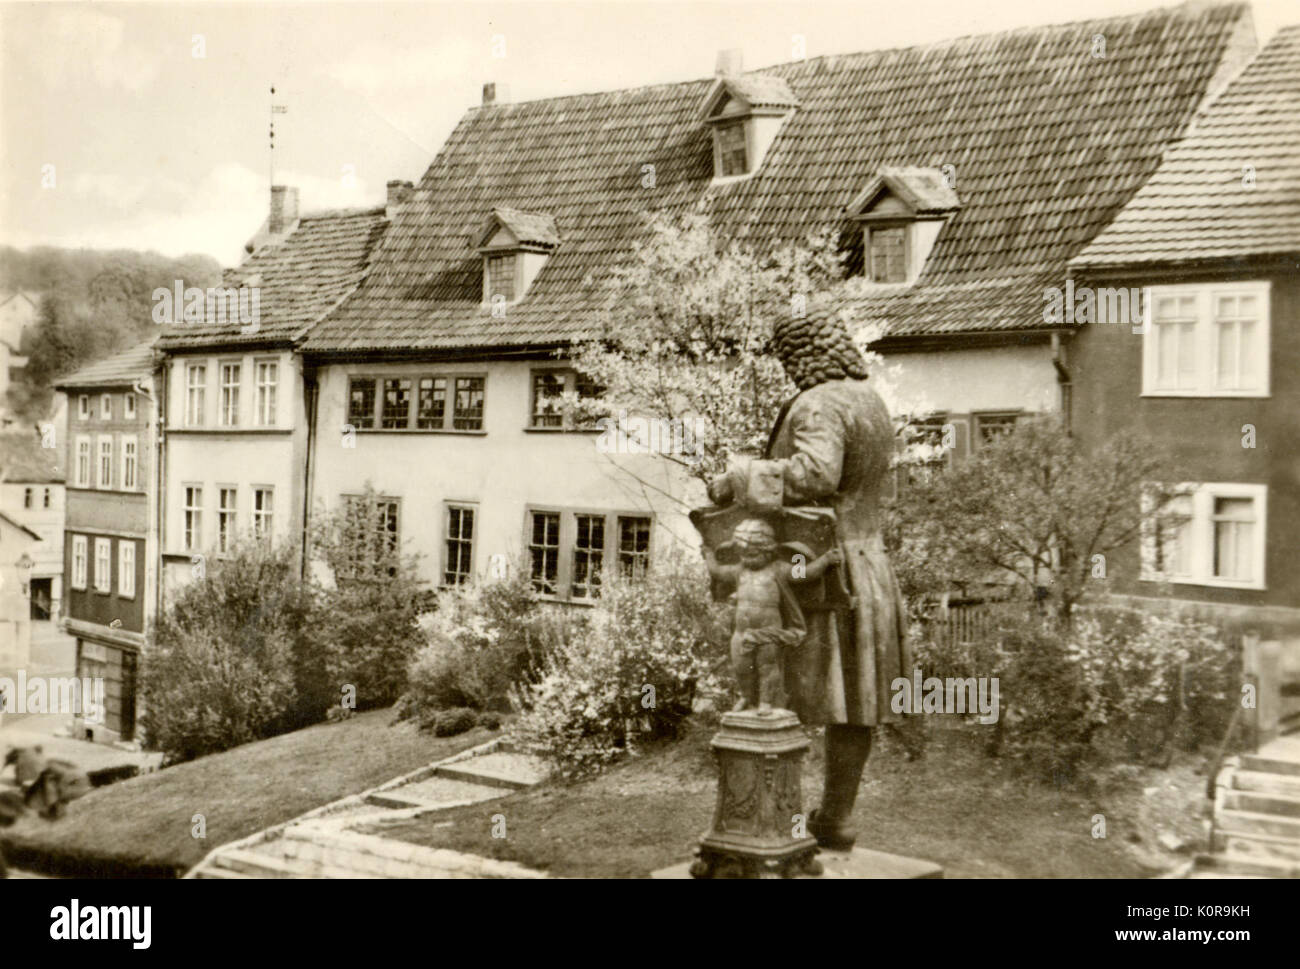 Johann Sebastian Bach birthhouse at Eisenach with statue of him in front.   German composer & organist, 1685-1750 Stock Photo